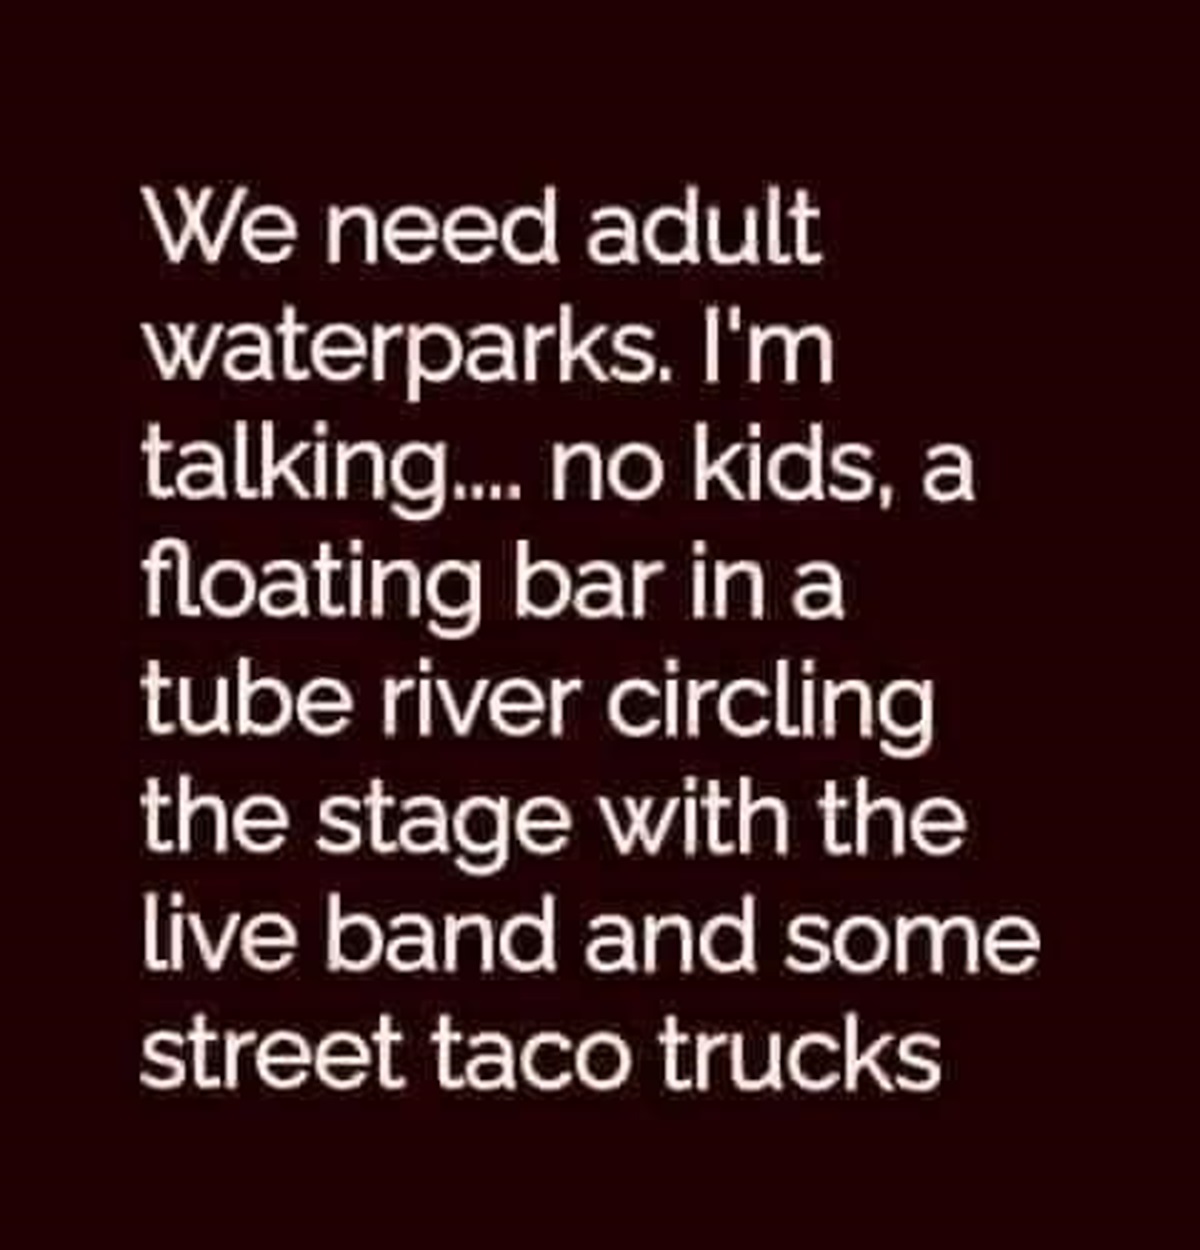 lilac - We need adult waterparks. I'm talking.... no kids, a floating bar in a tube river circling the stage with the live band and some street taco trucks